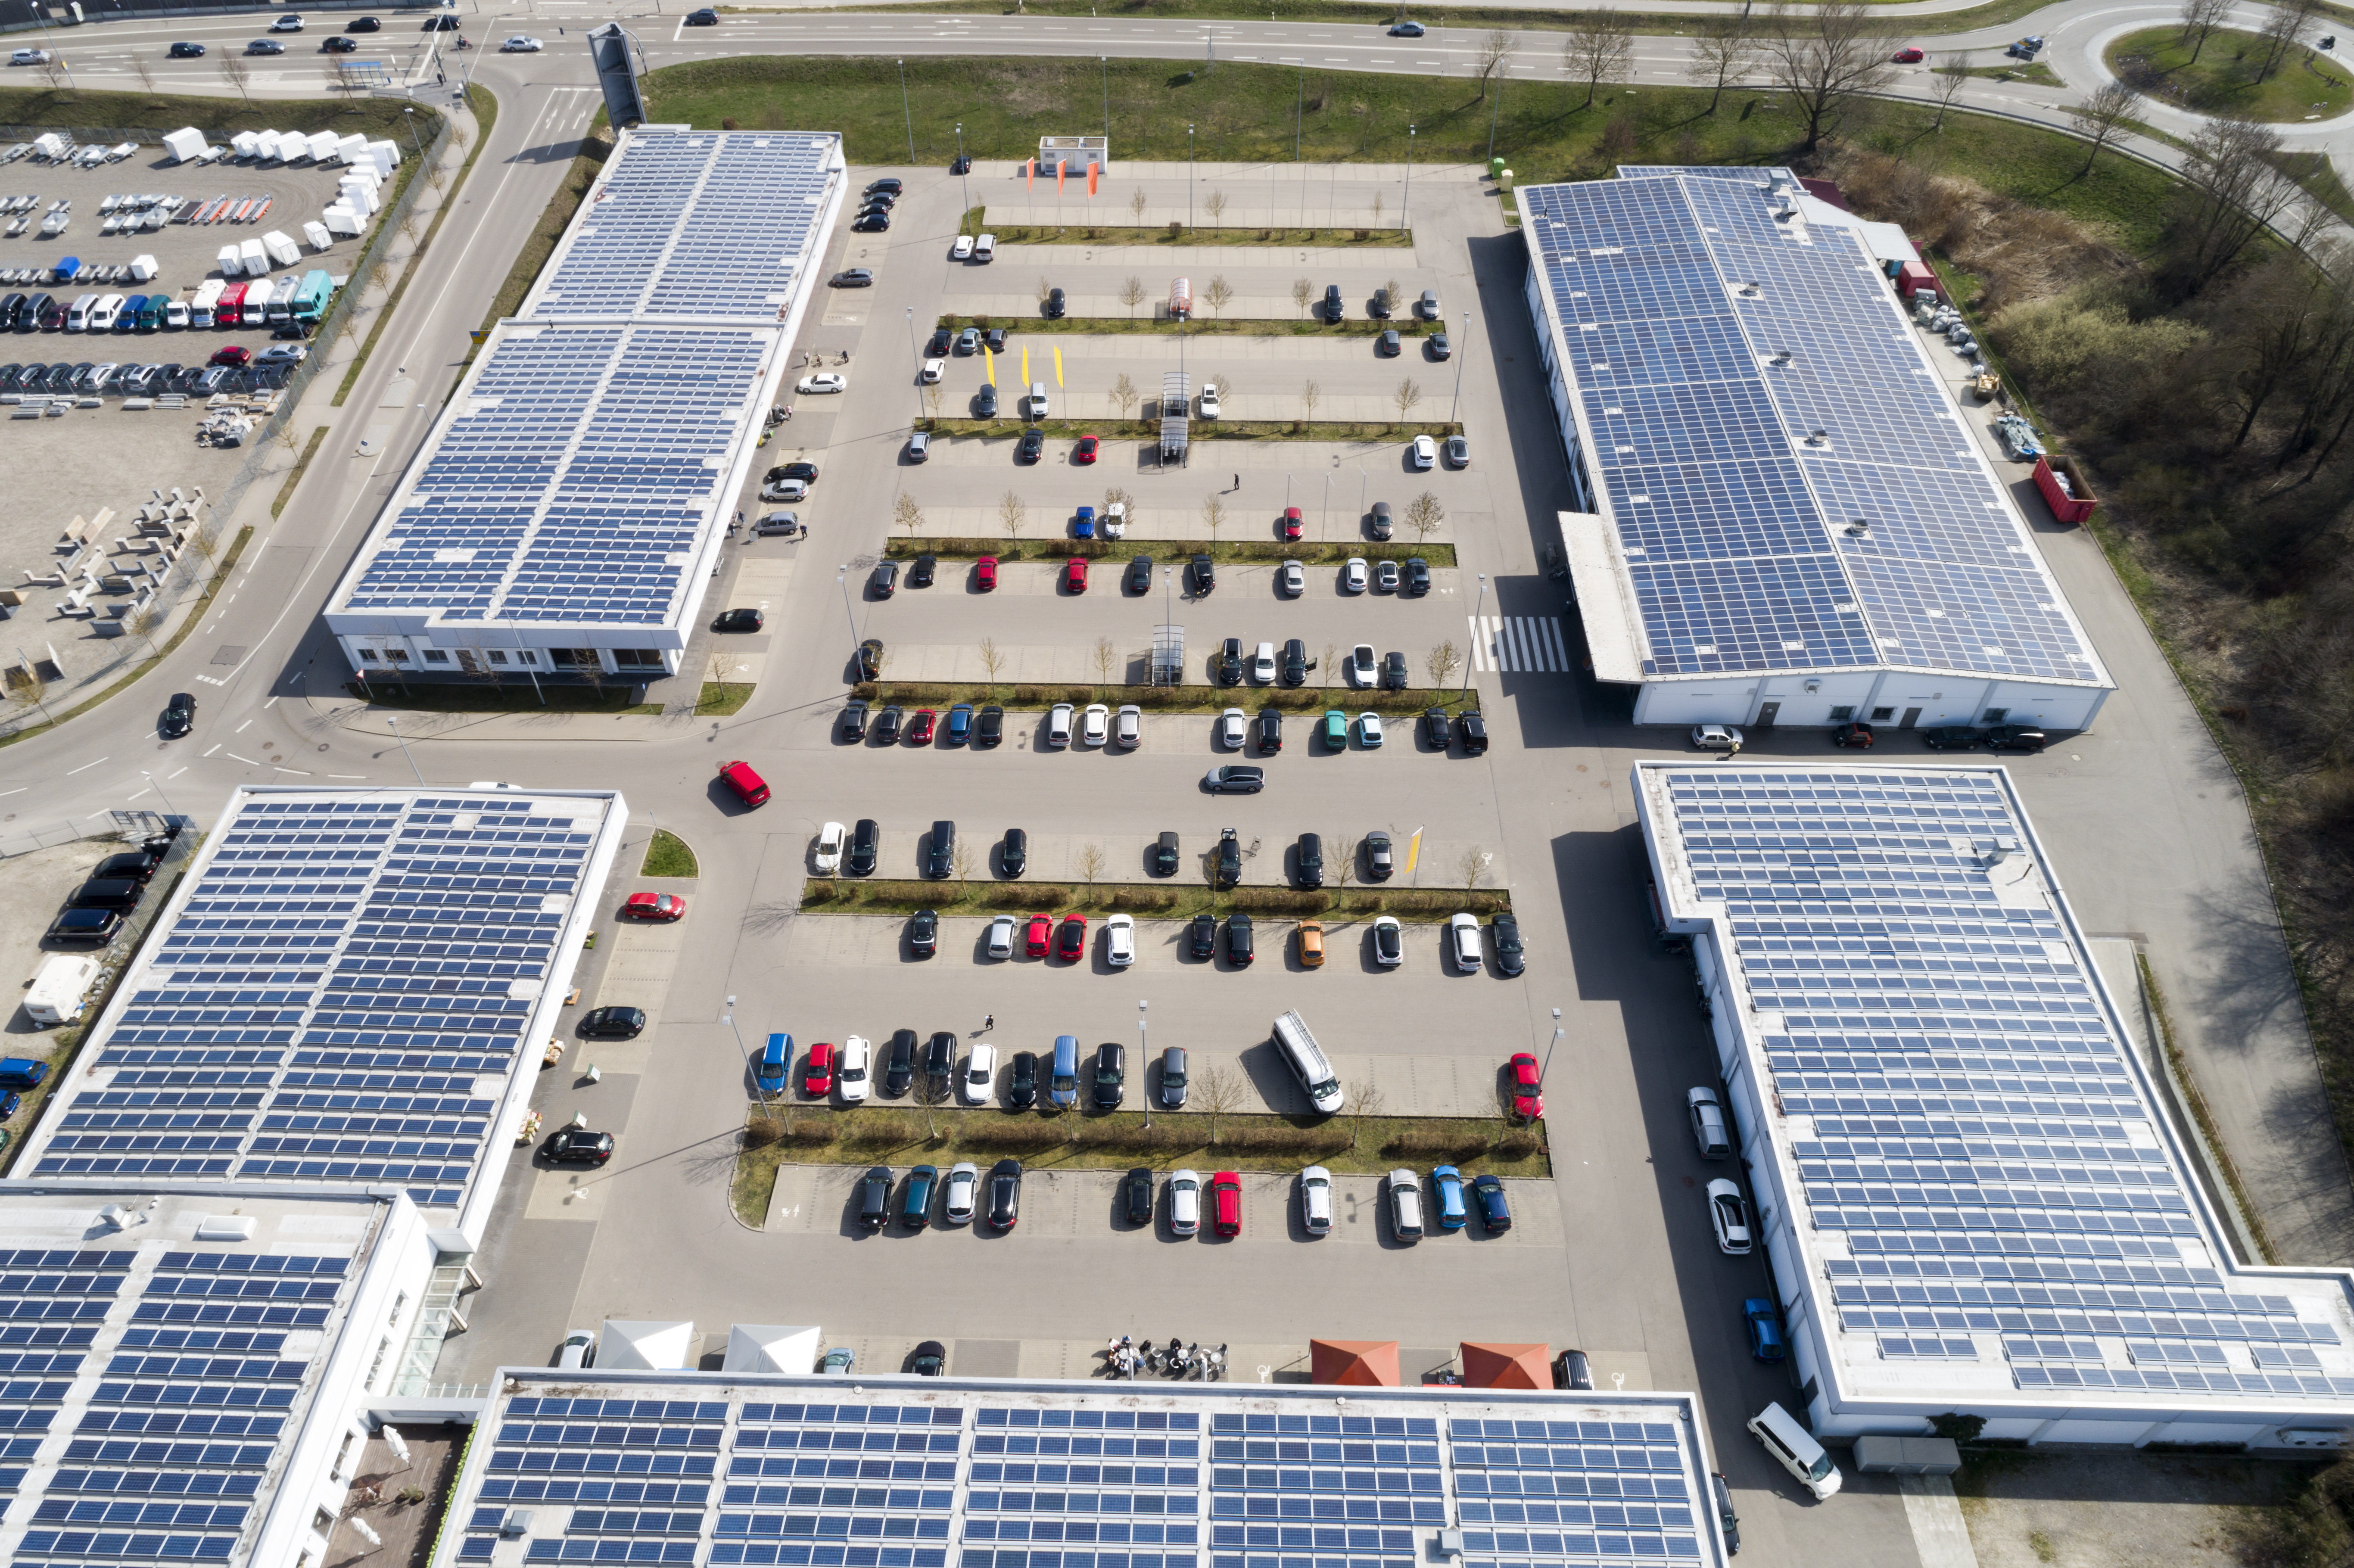 Shopping mall with solar panels and parking lot from above